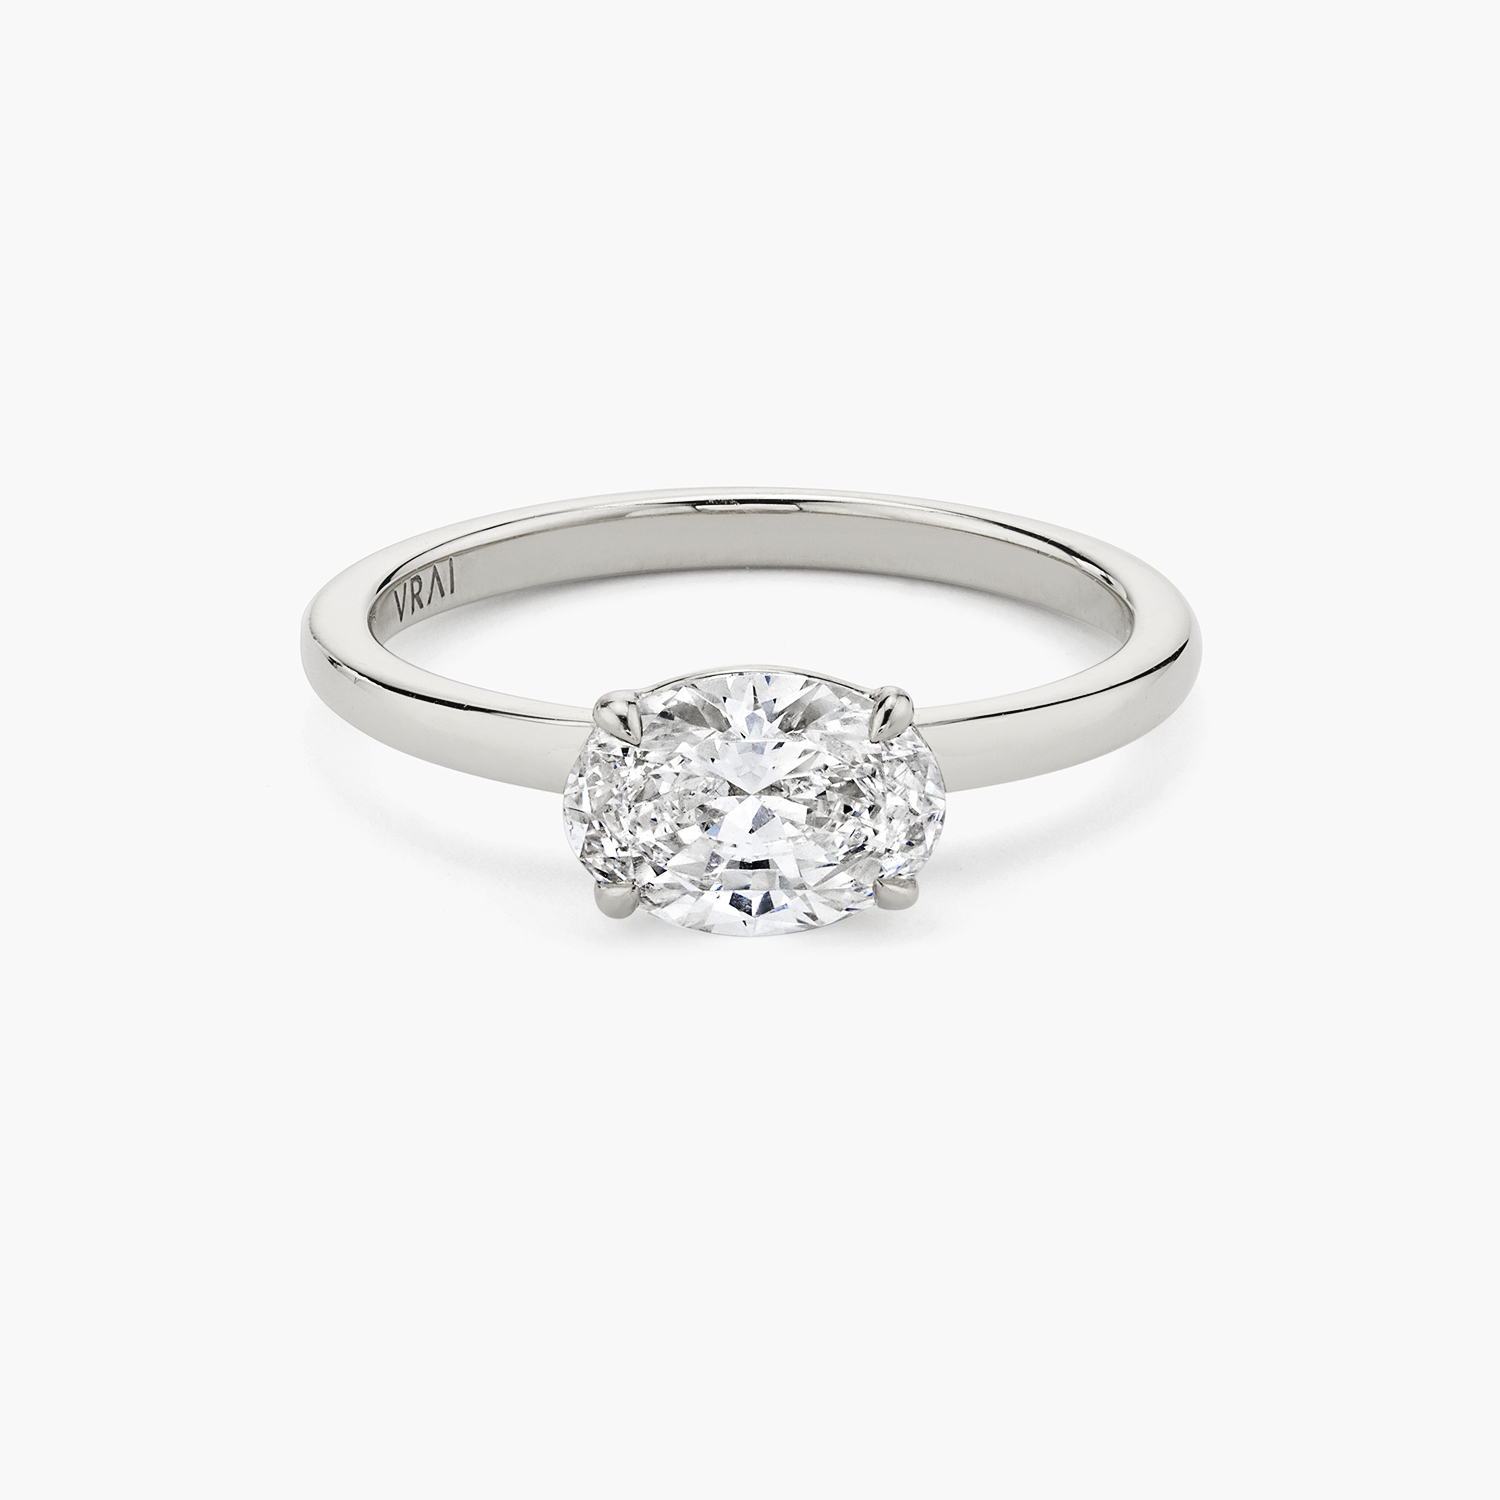 Oval Diamond Engagement Ring Guide | Only Natural Diamonds